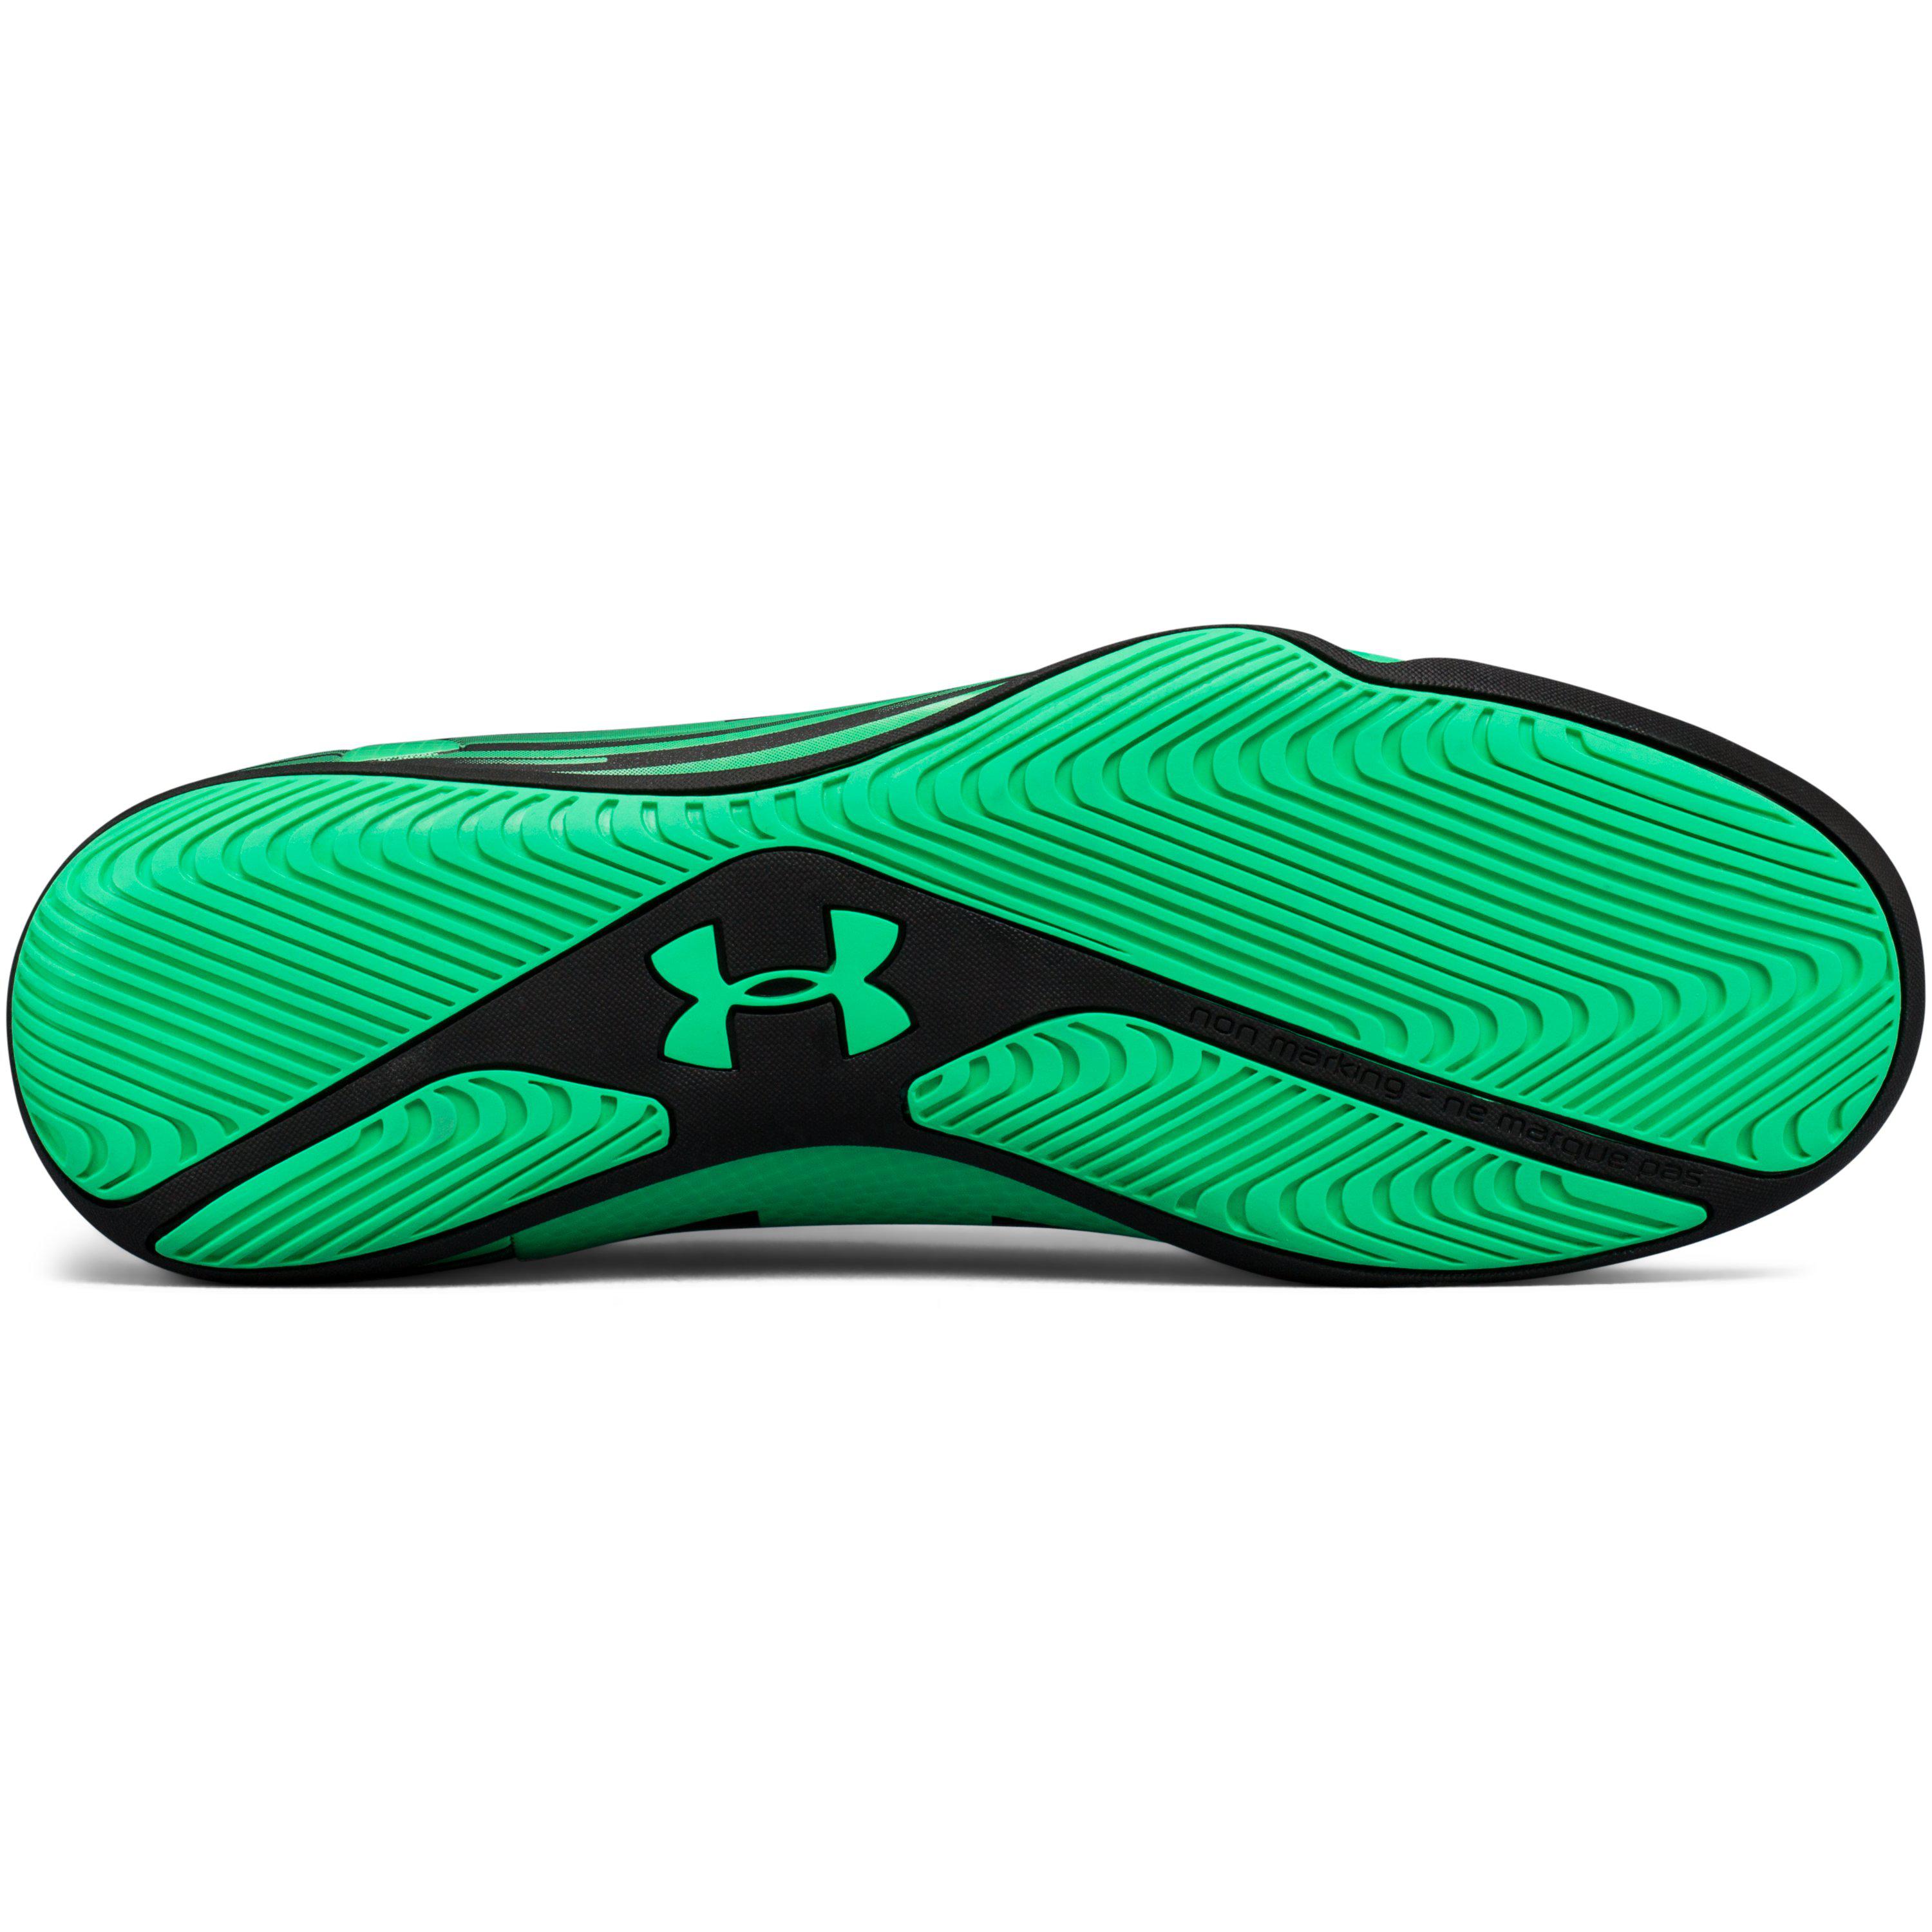 Under Armour Synthetic Men's Ua Spotlight Indoor Soccer Shoes in Black ...